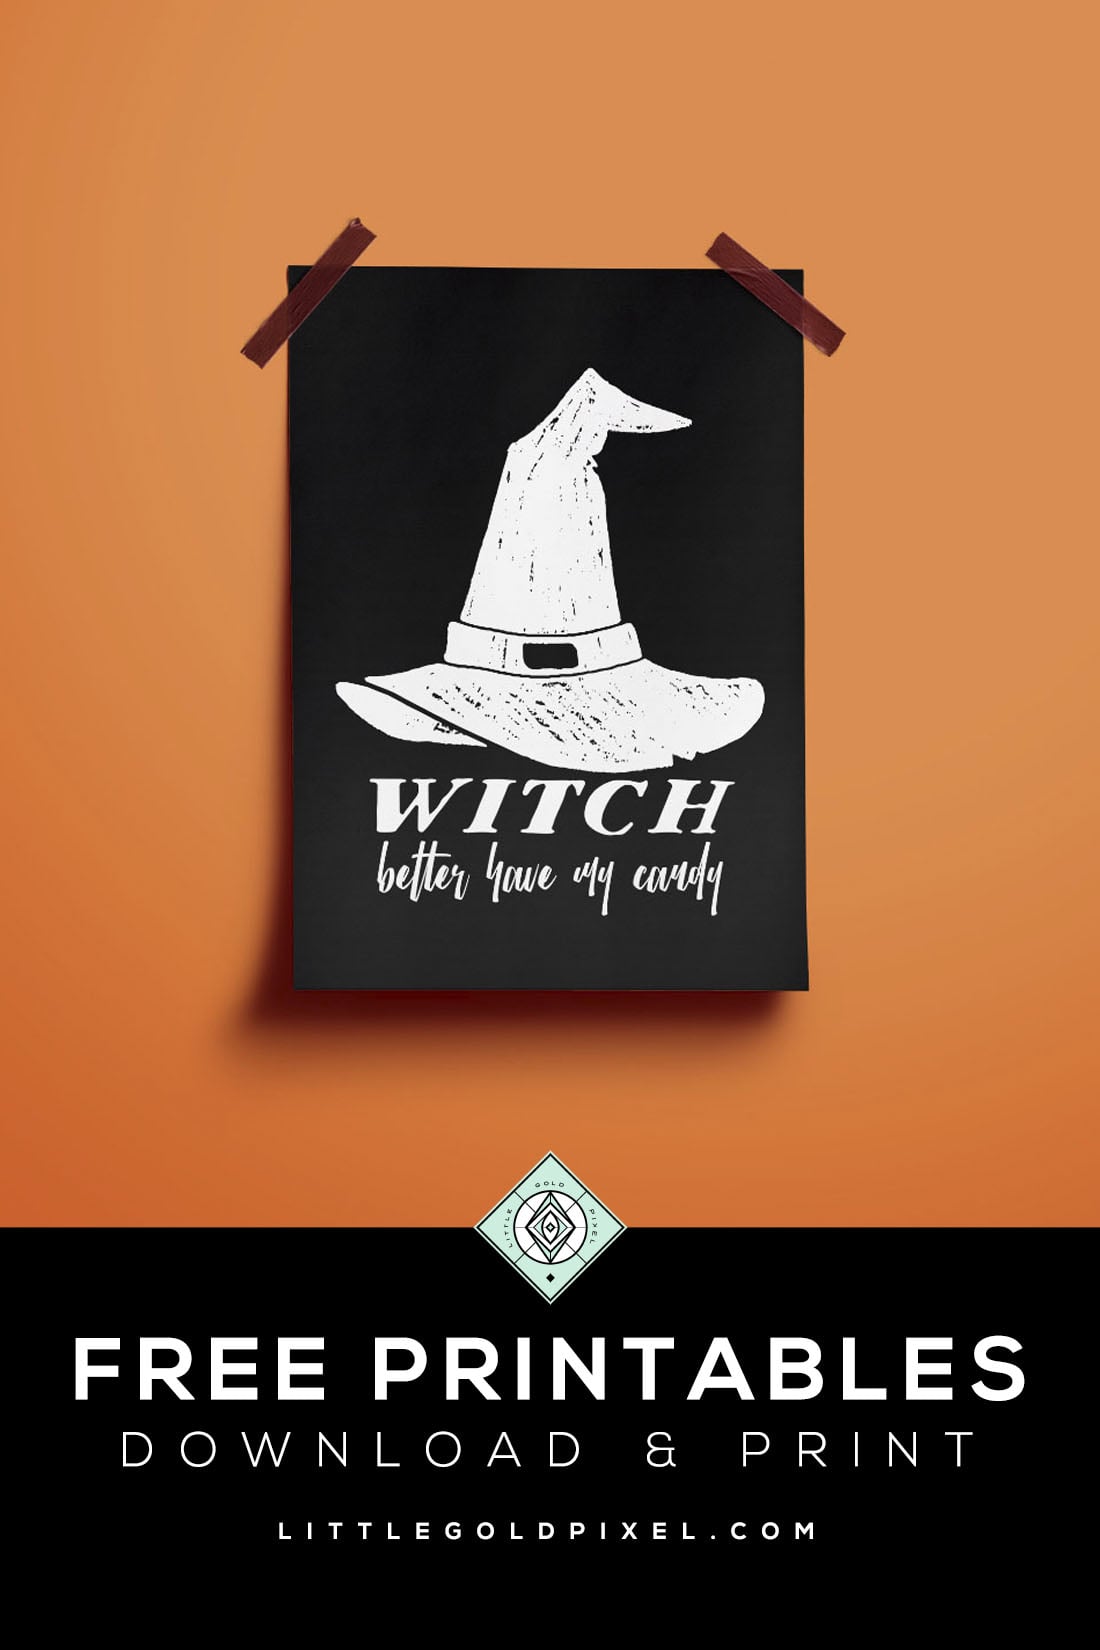 Witch Better Have My Candy Free Halloween Printable • Little Gold Pixel • In which I share a Witch Better Have My Candy free Halloween printable to hang on your door or holiday party. Download, print and hang up today! #halloween #printable #freebie #witch